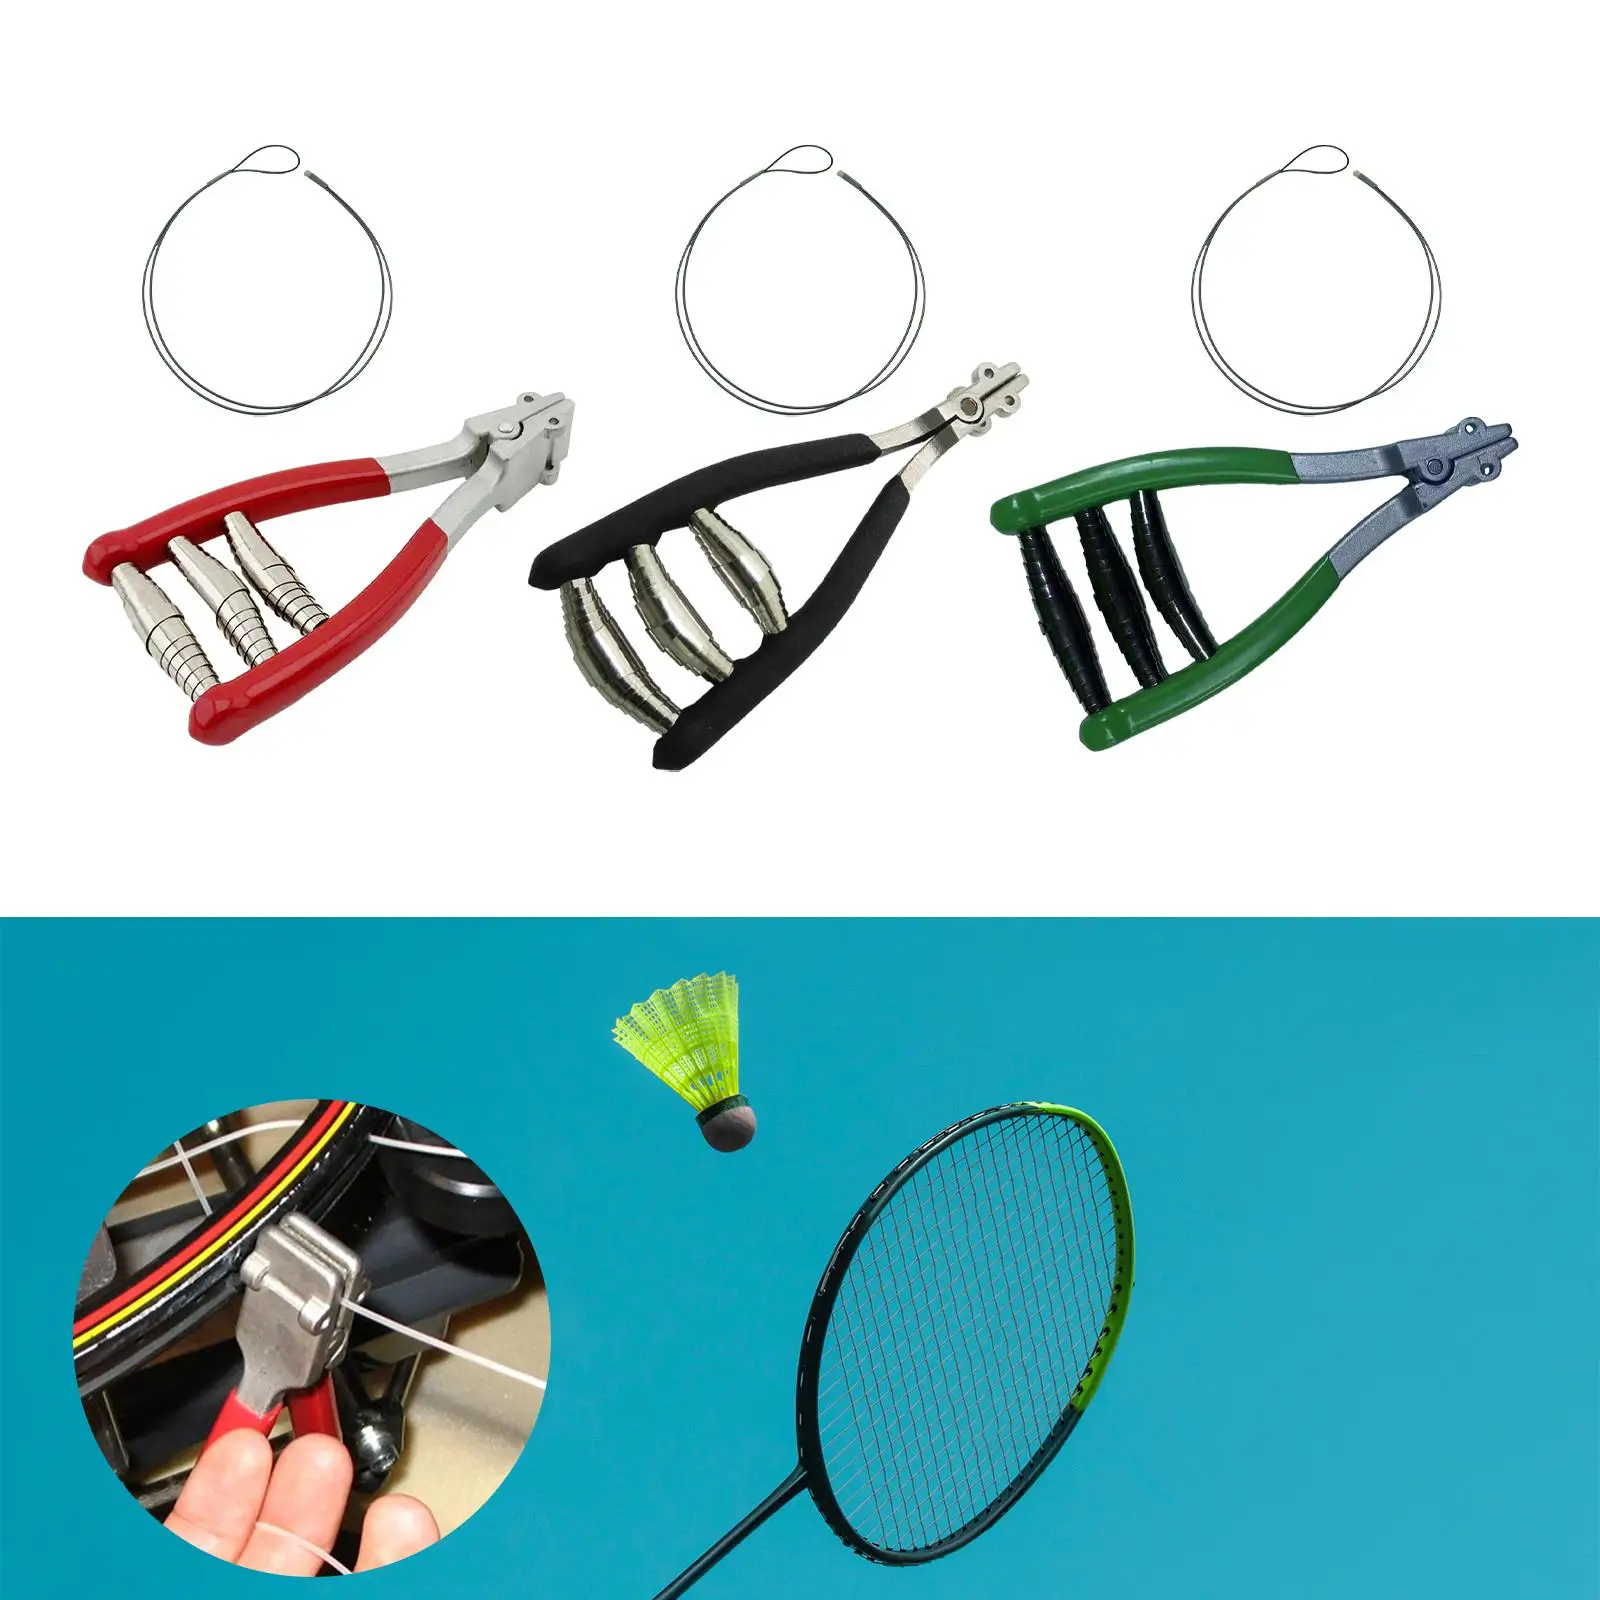 Starting Clamp Stringing Clamp 3 Spring Starter Clamp Wide Head Professional for Tennis Racquet Squash Badminton Accessories